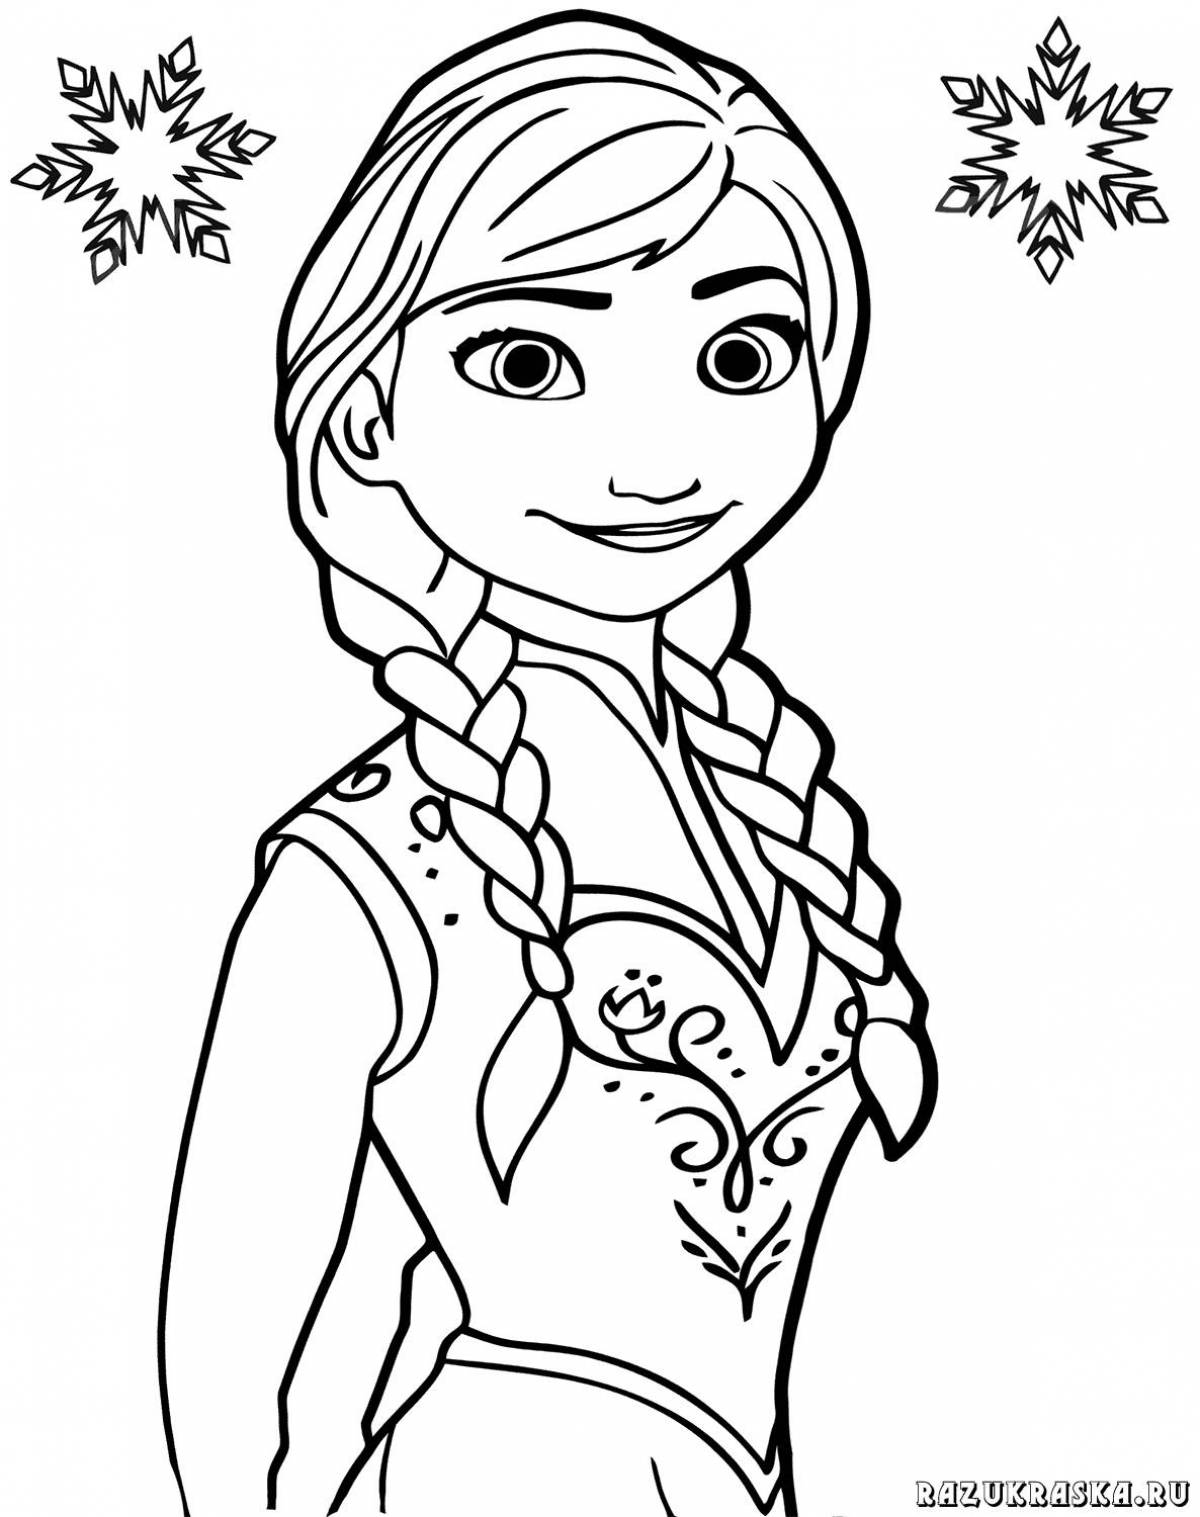 Fascinating coloring elsa and anna for kids